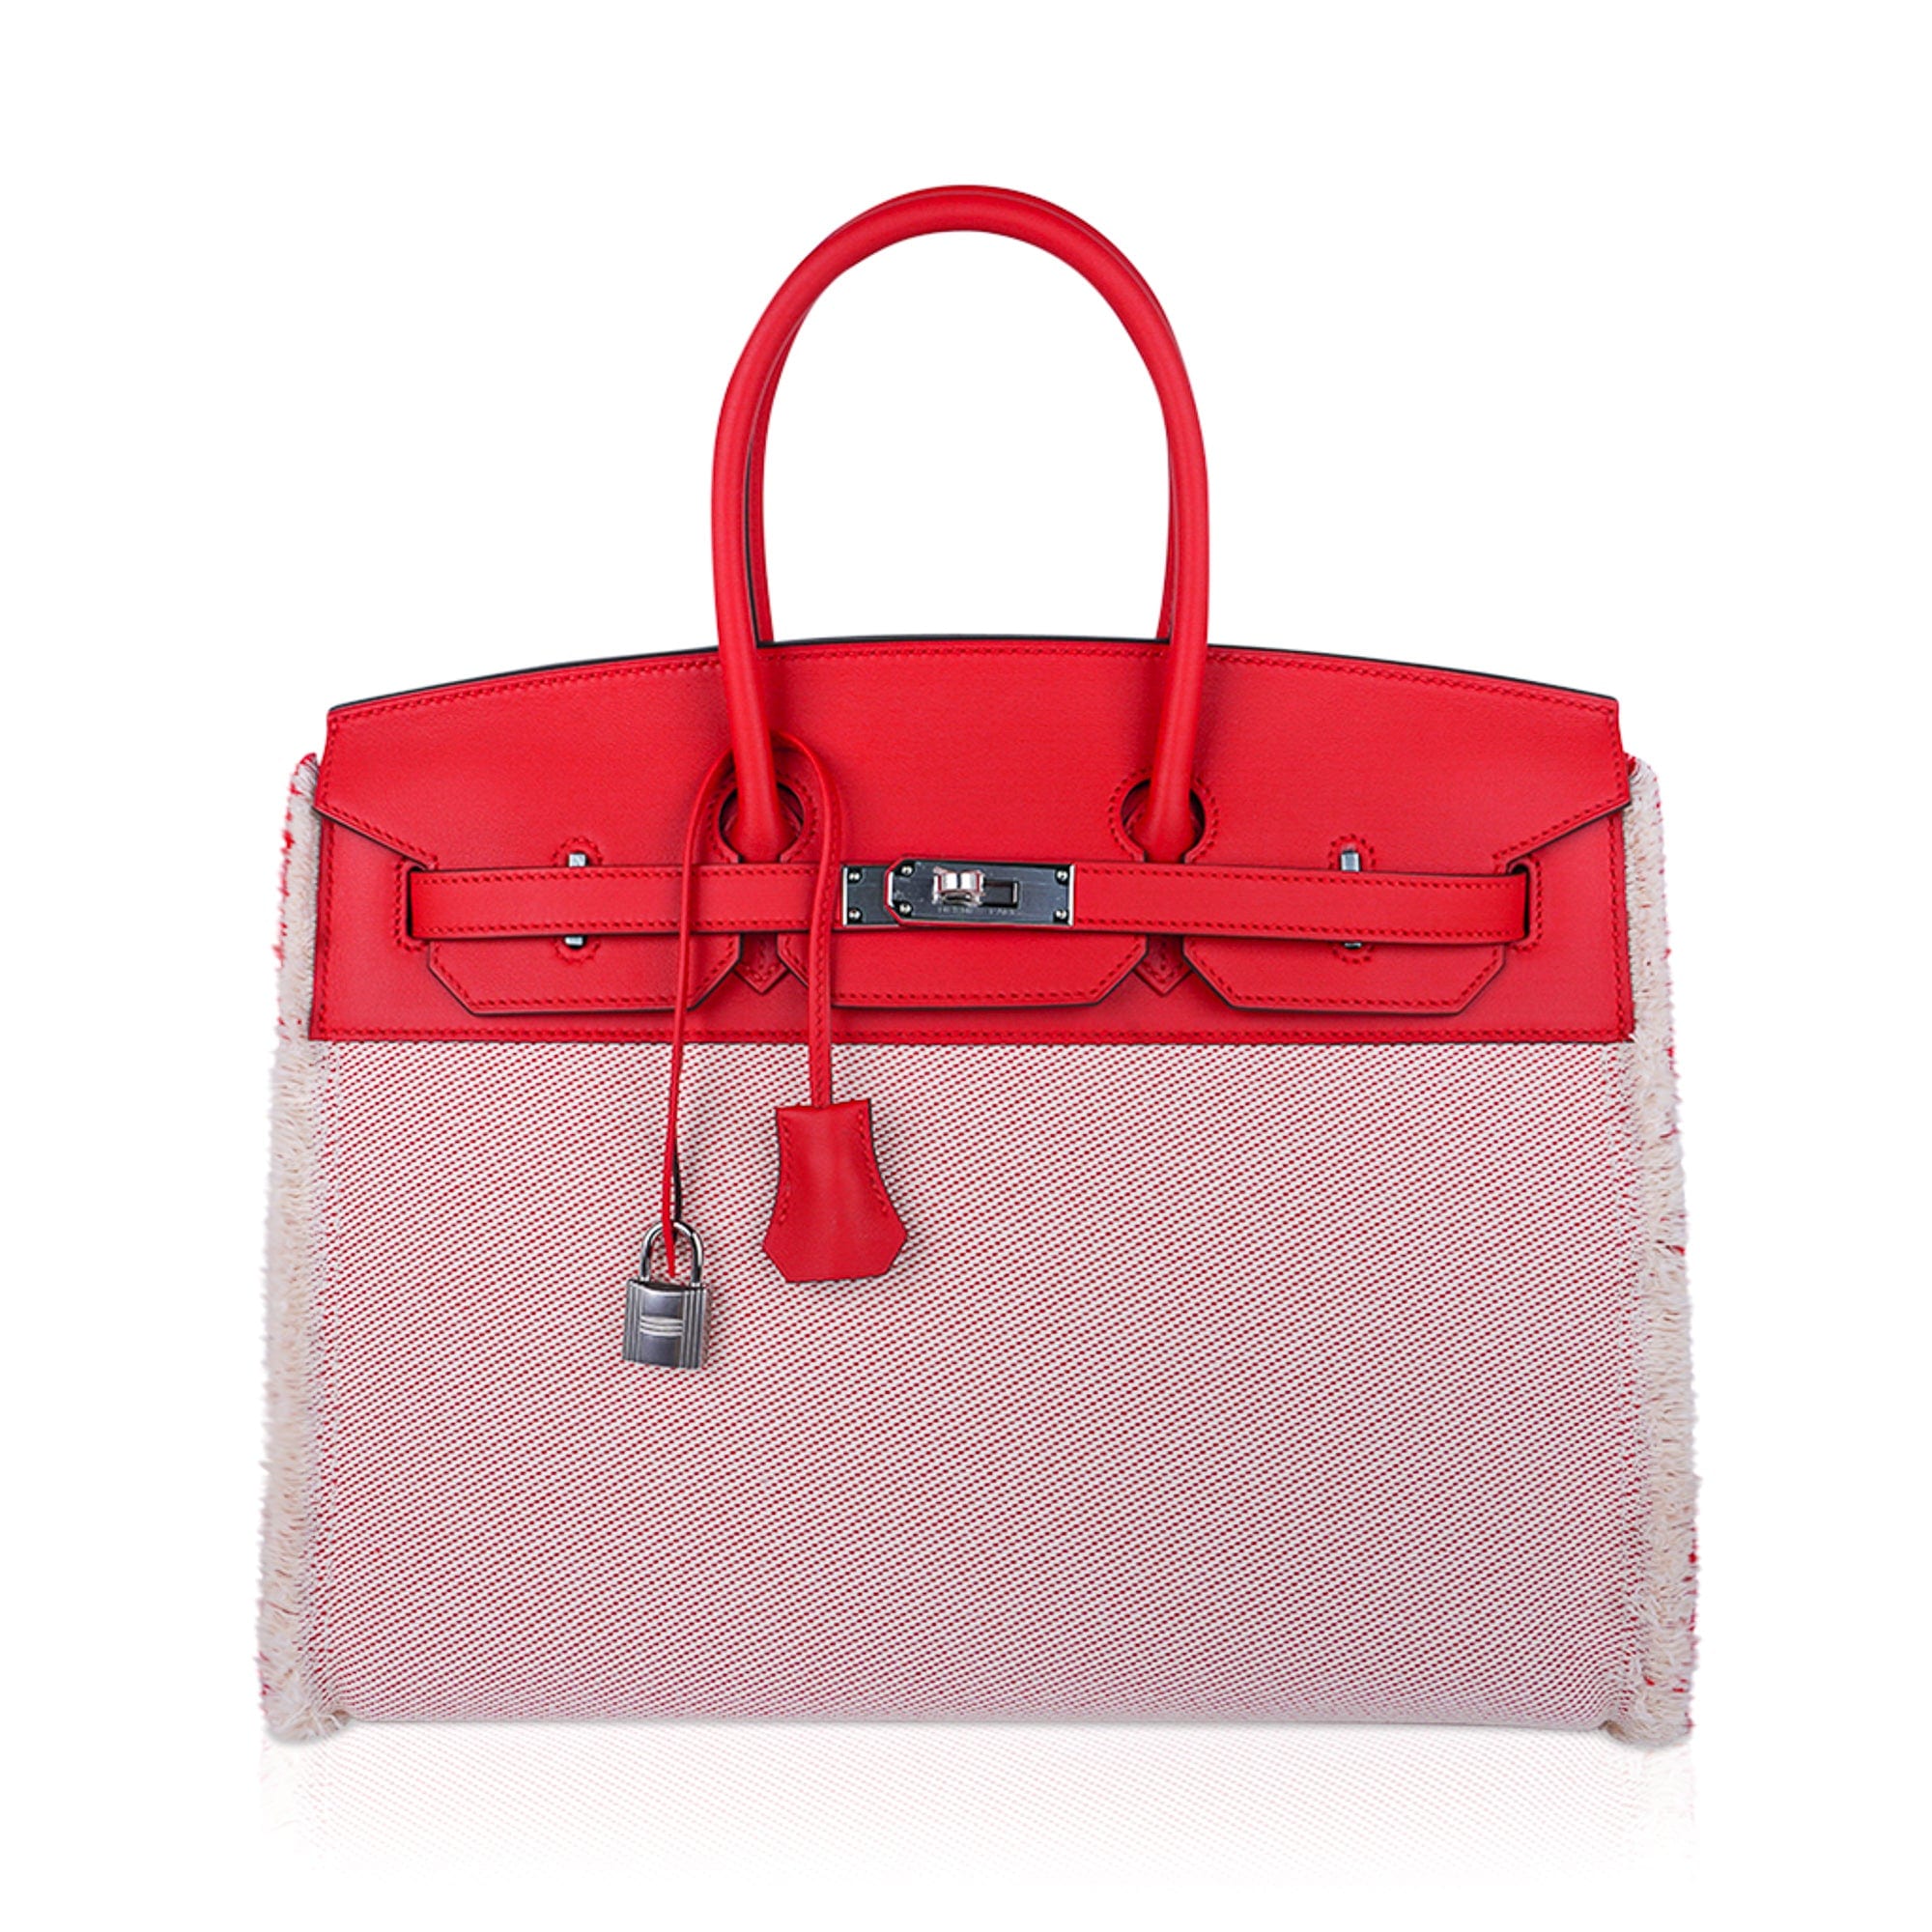 Hermes Birkin Fray Fray 35 Framboise Limited Edition Swift Leather Toile Bag